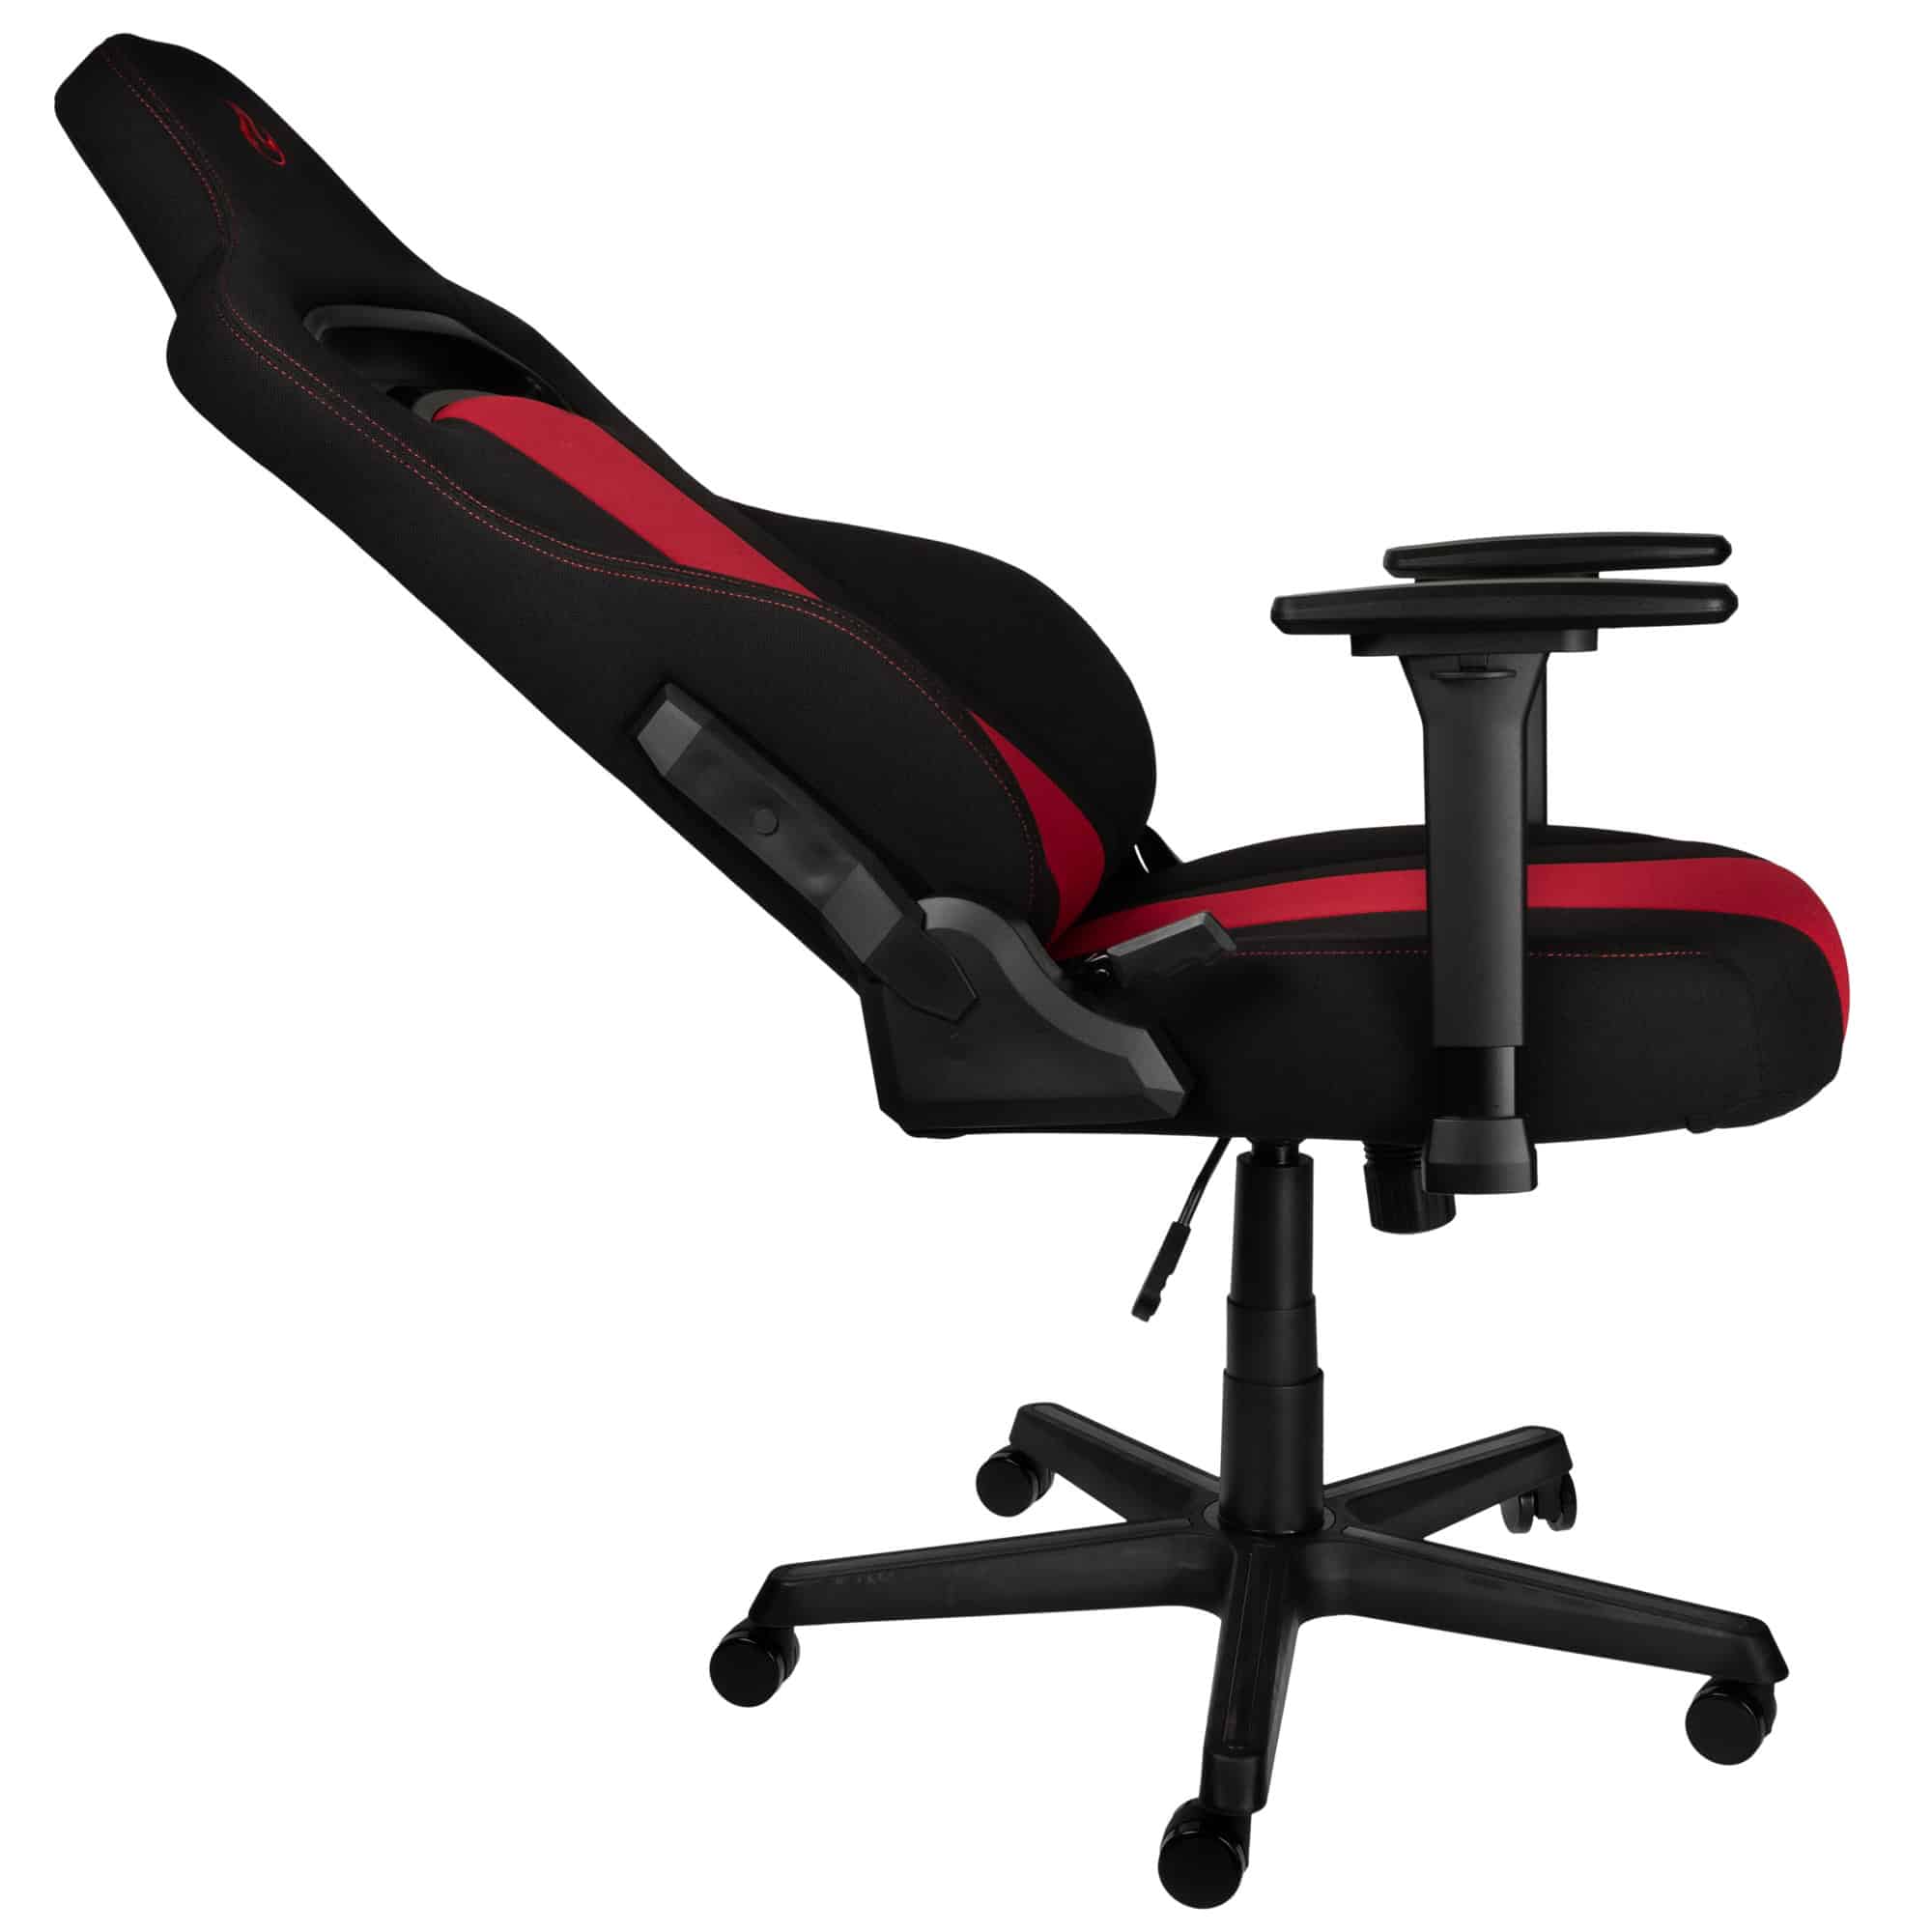 Nitro Concepts E250 Series Gaming Chair Black/Red